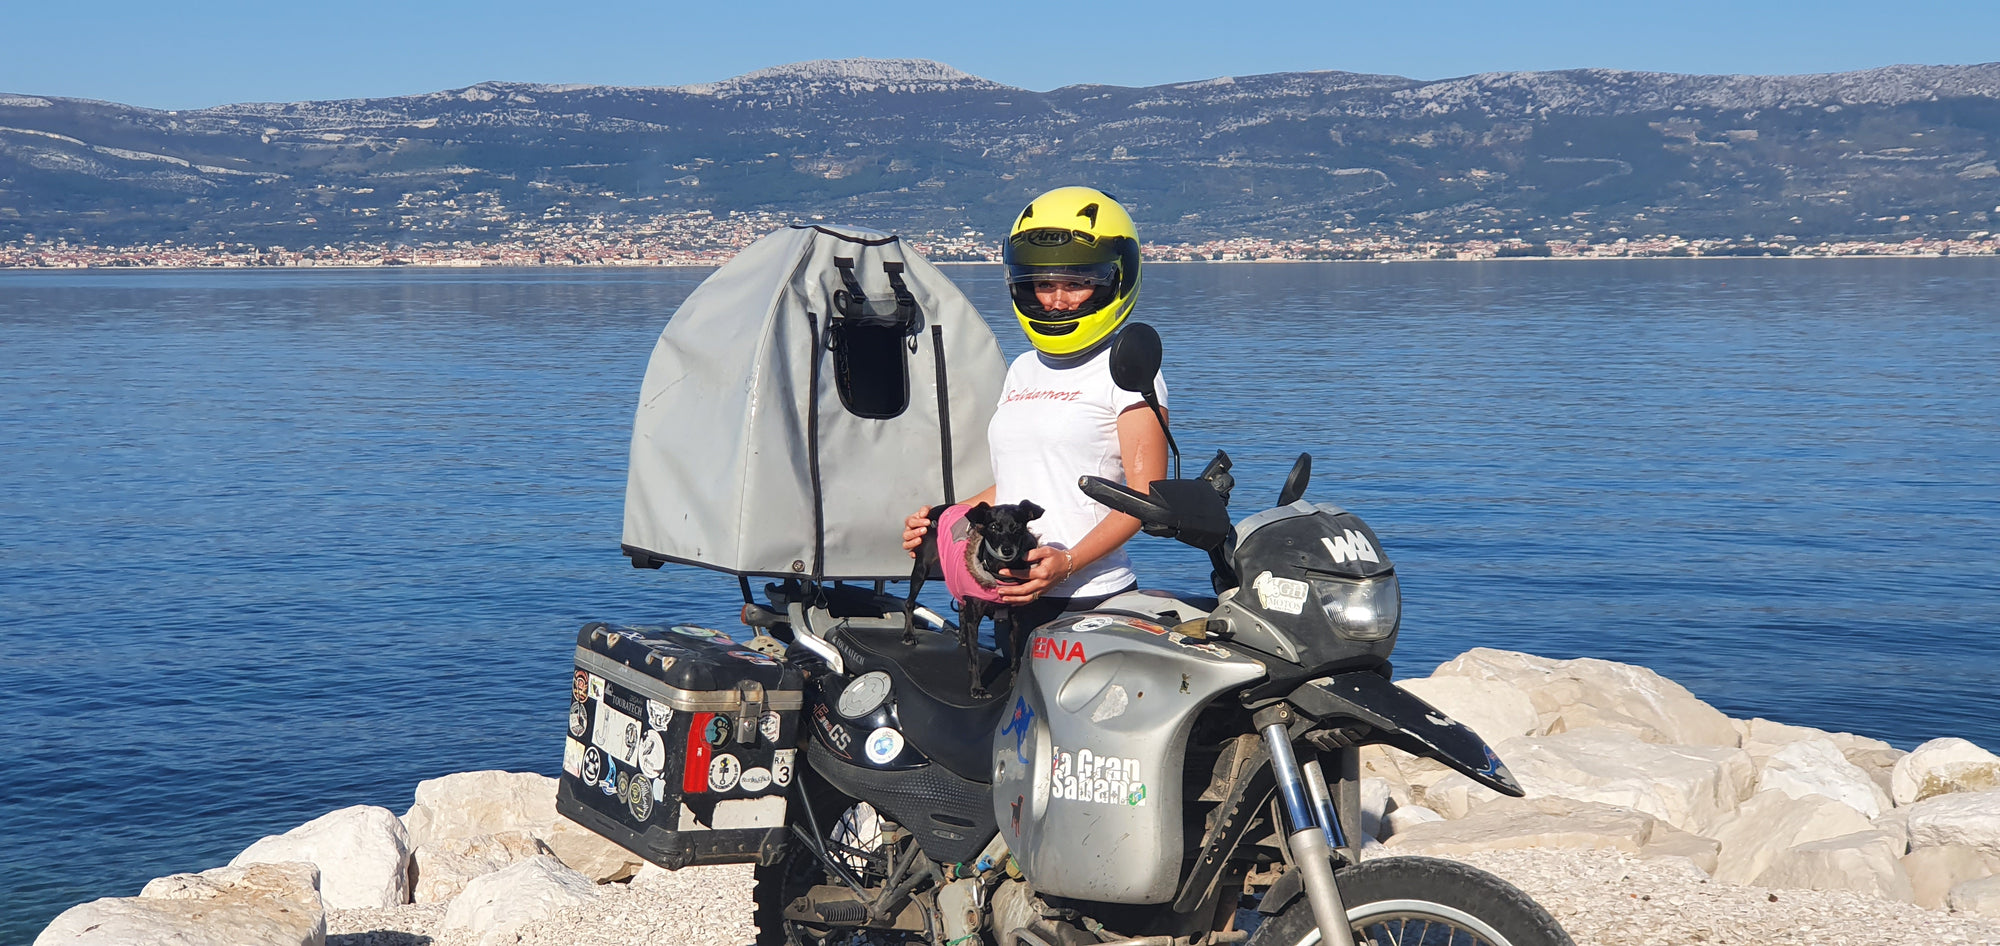 Pillion Pooch Motorcycle Dog Carrier on a BMW F650GS. Photo from The Pack Track of Janell and her biker dog Shadow in Croatia.